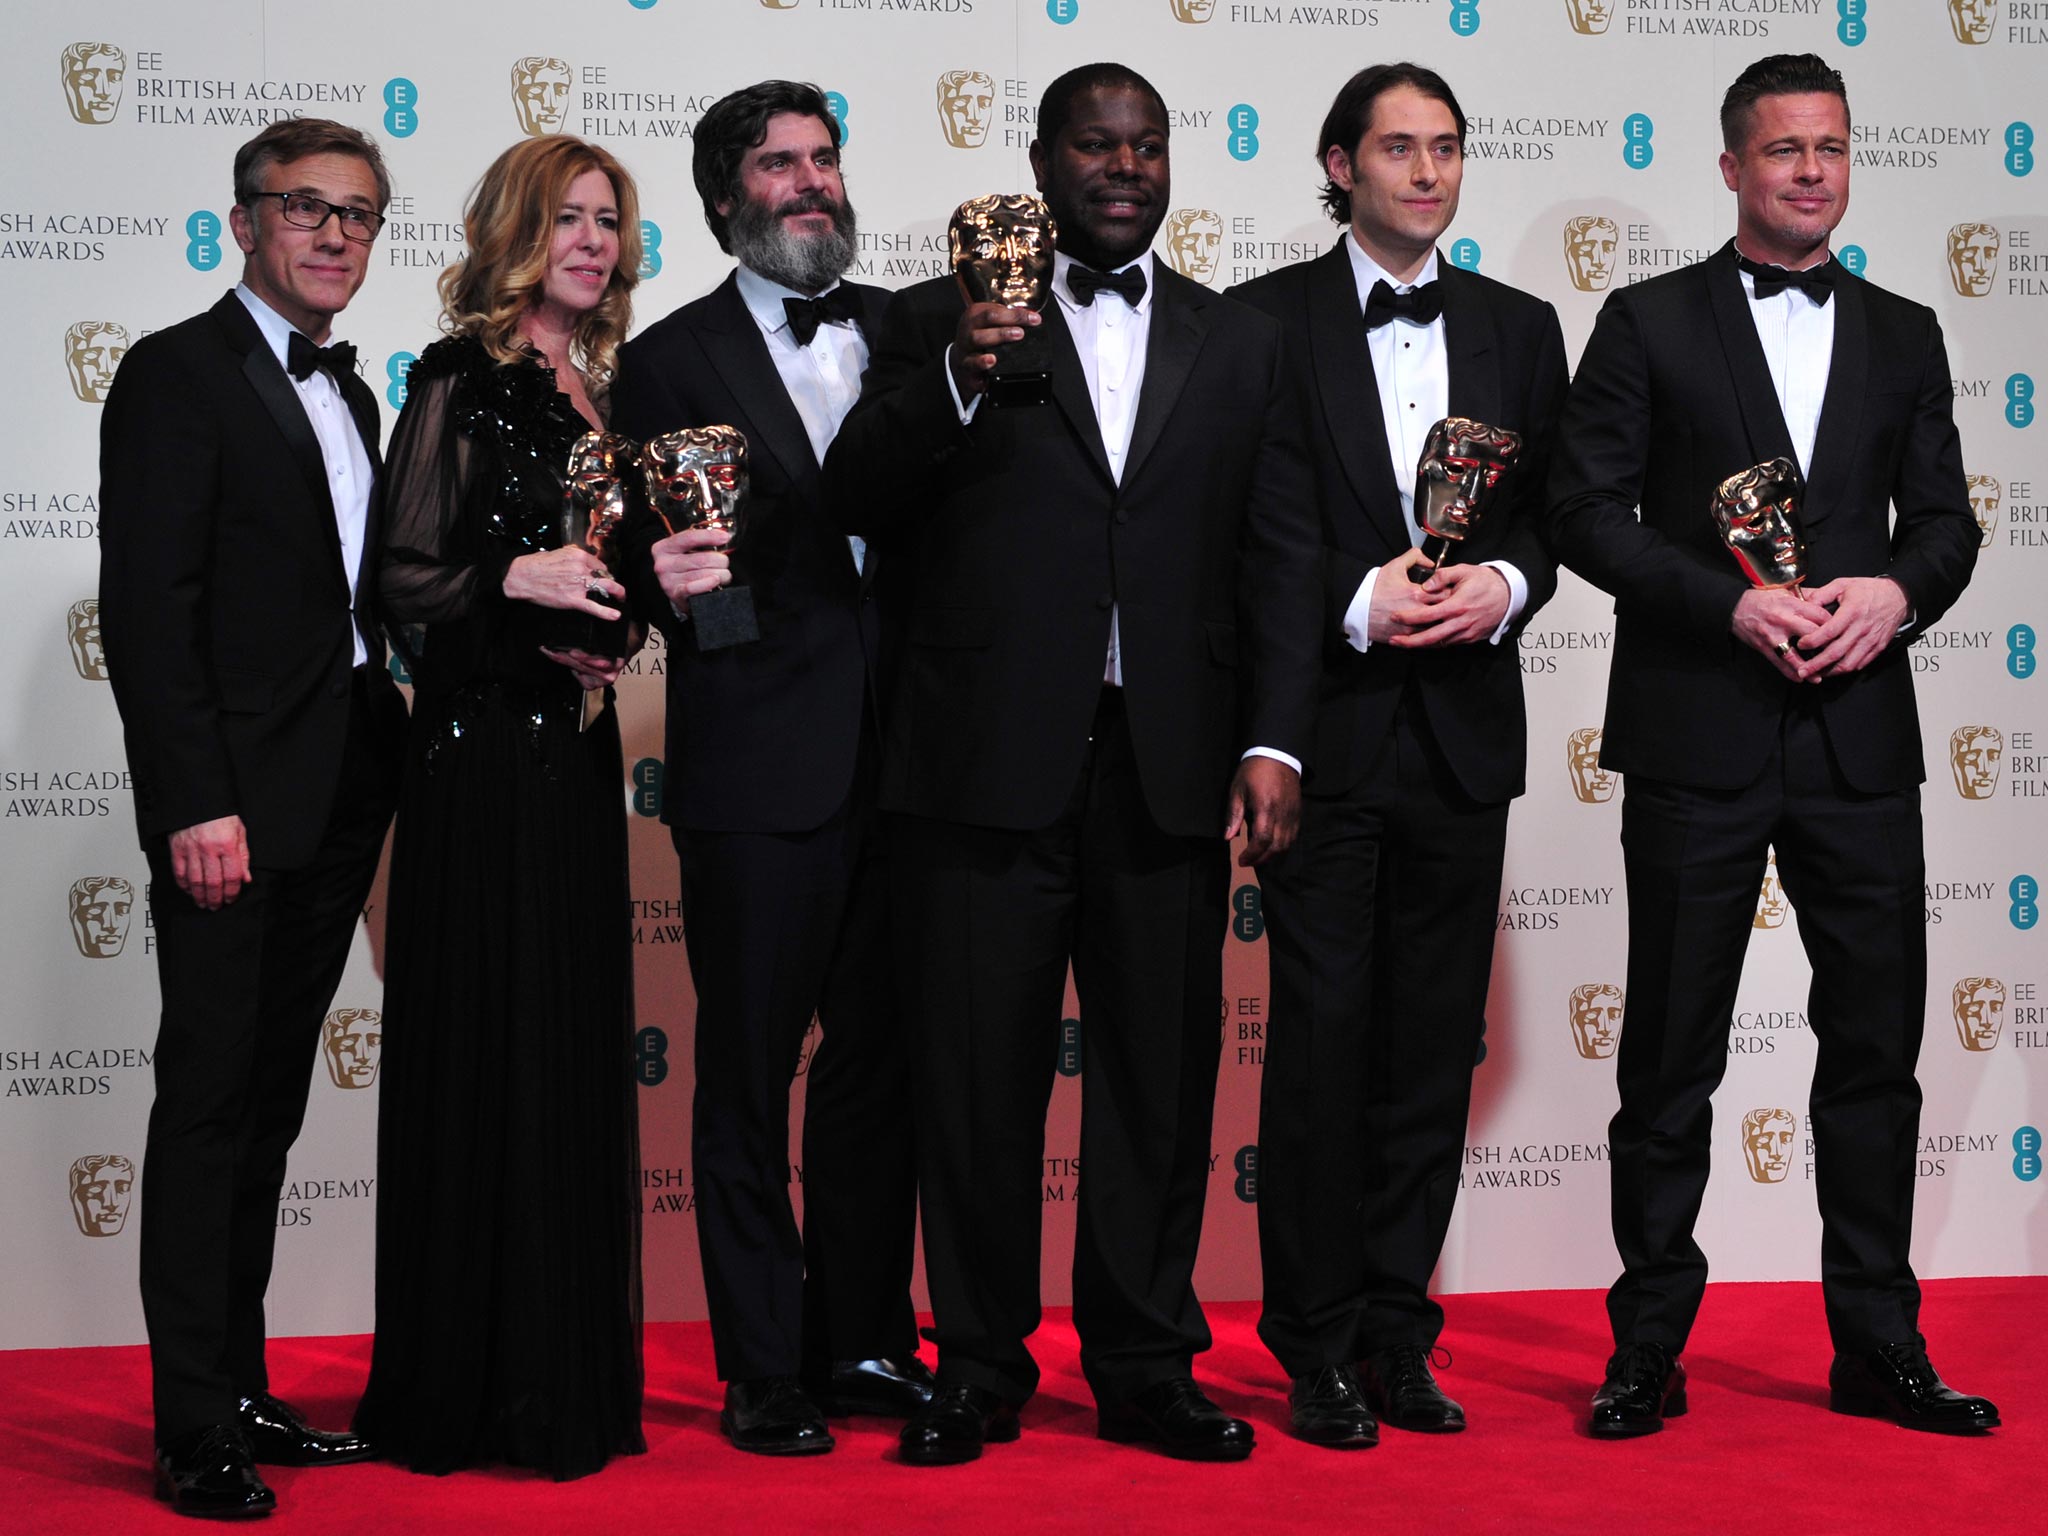 From left to right: Producer Dede Gardner, Producer Jeremy Kleiner, Director Steve McQueen, Producer Anthony Katagas and Brad Pitt pose with their awards for best film for '12 Years A Slave'